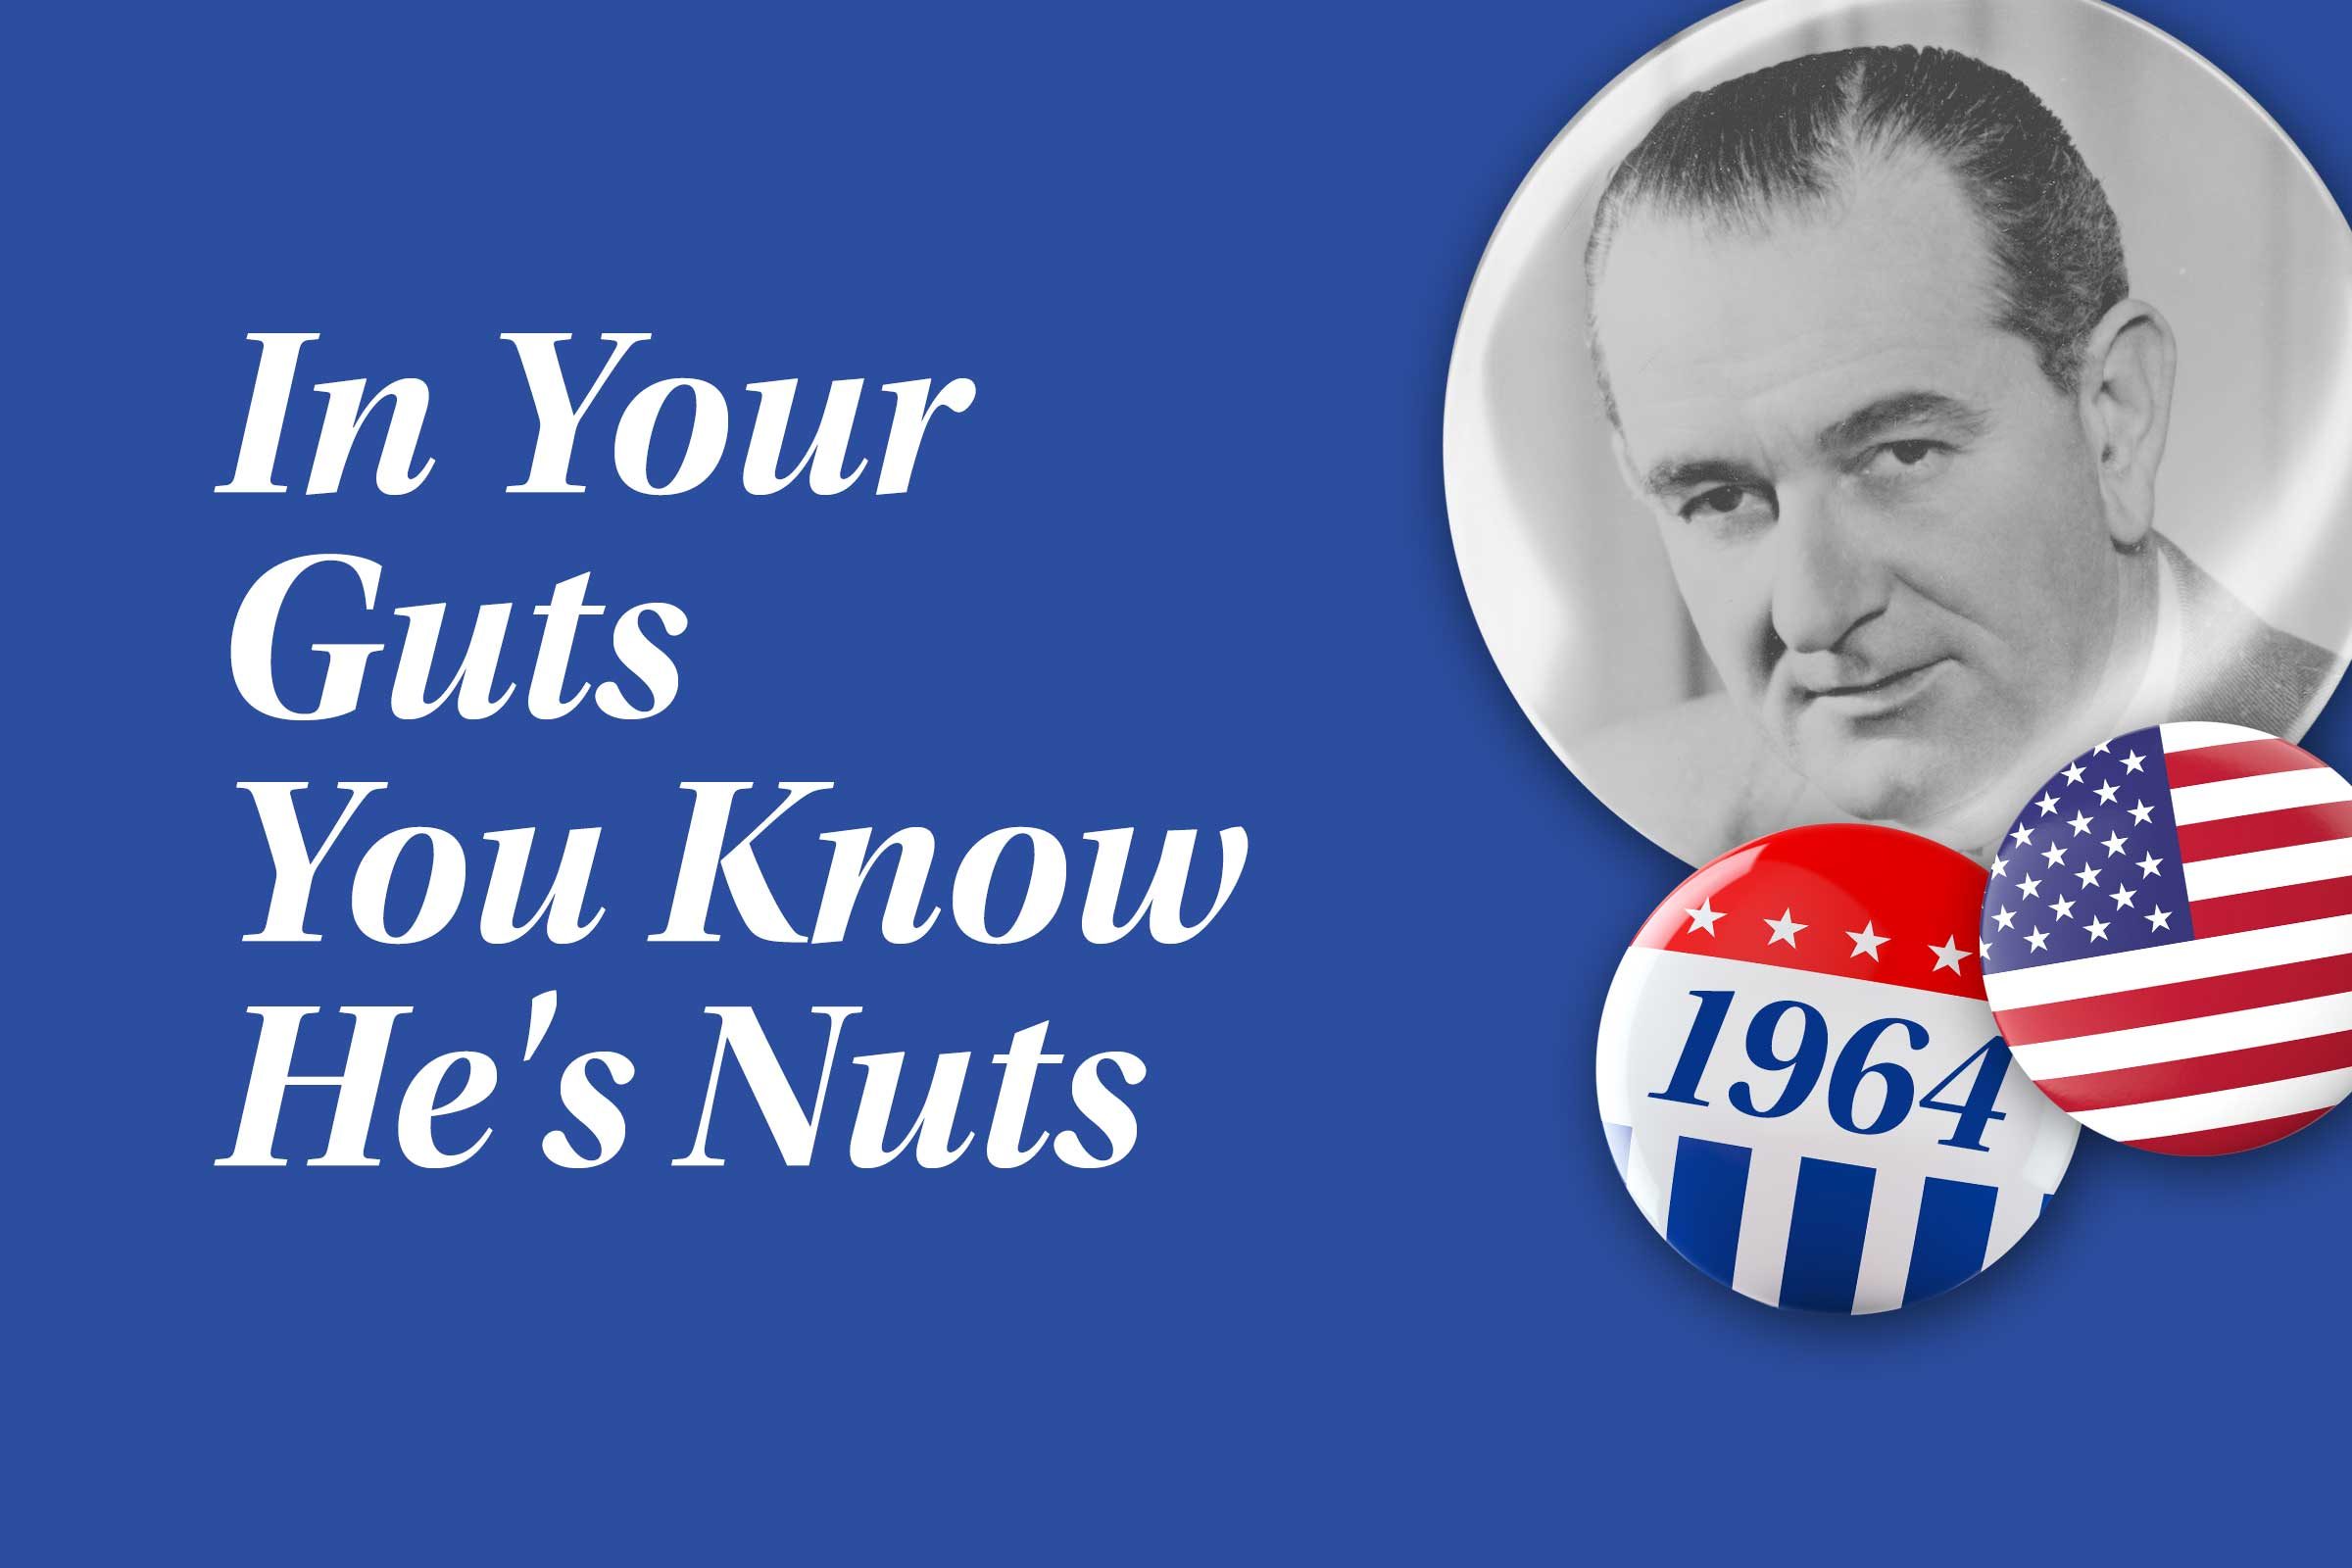 Funniest Presidential Campaign Slogans in . History | Reader's Digest